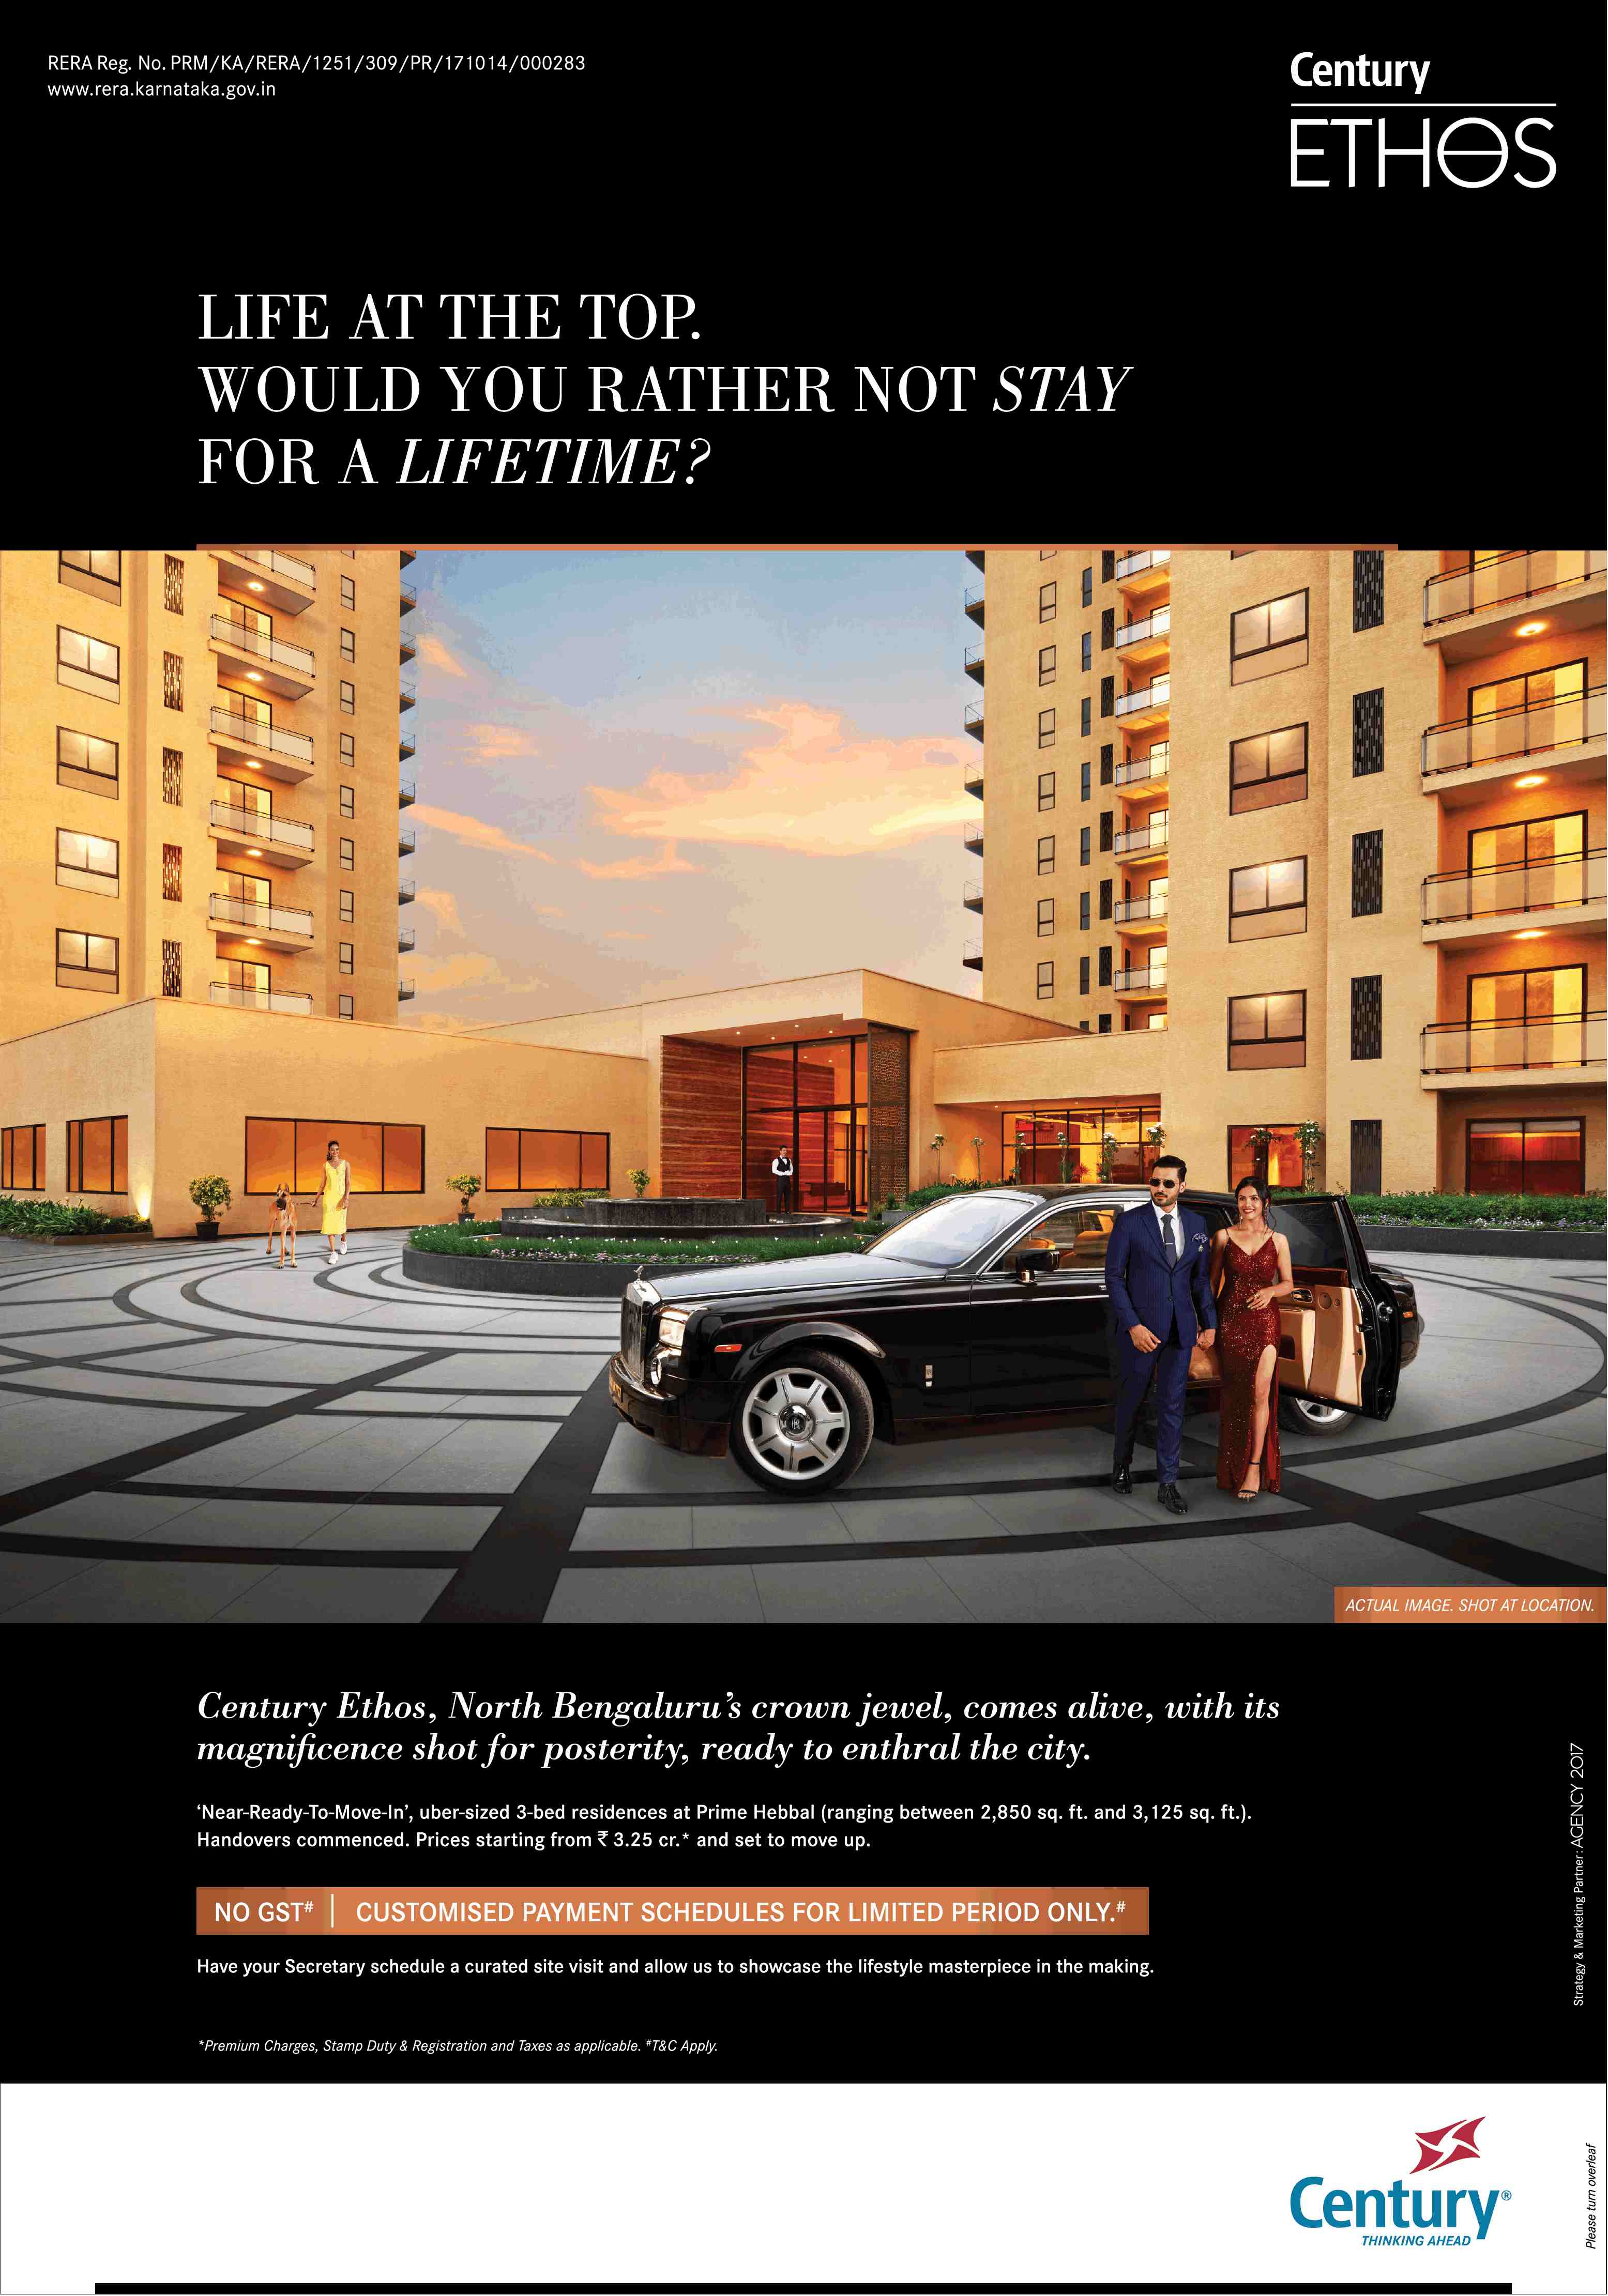 Near-ready-to-move-in, no GST at Century Ethos in Hebbal, Bangalore